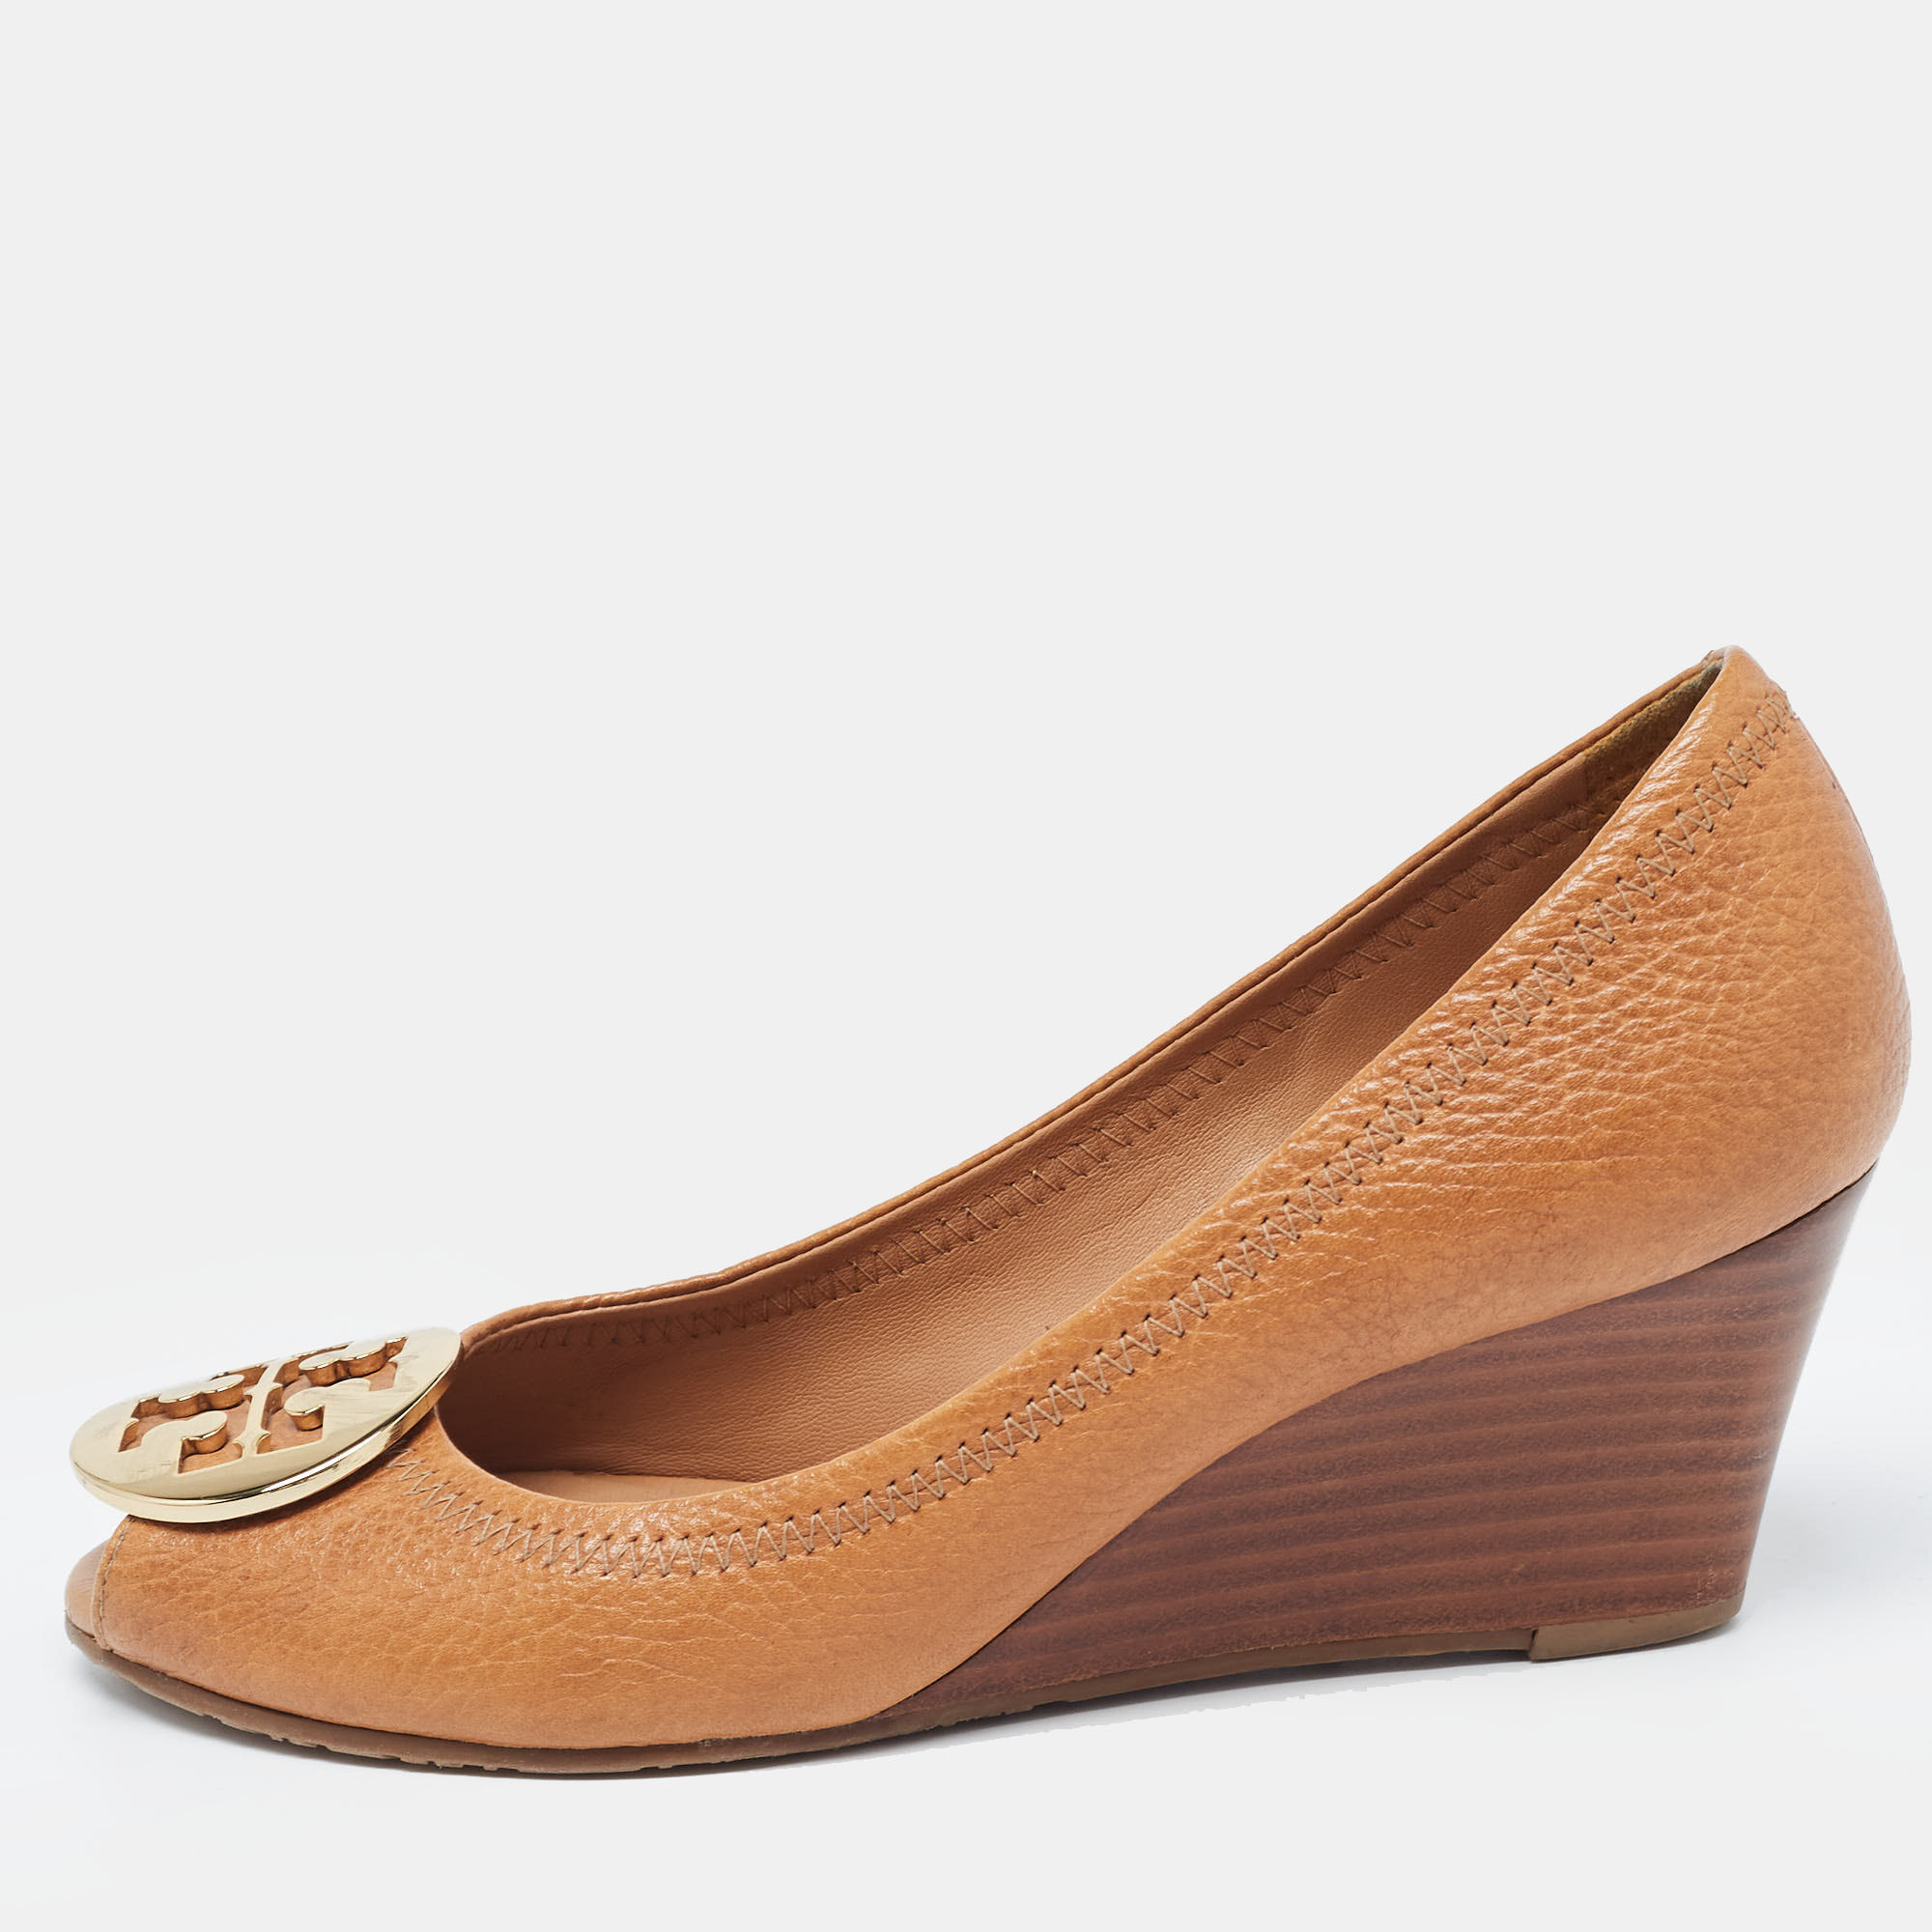 

Tory Burch Tan Leather Sally Wedge Pumps Size